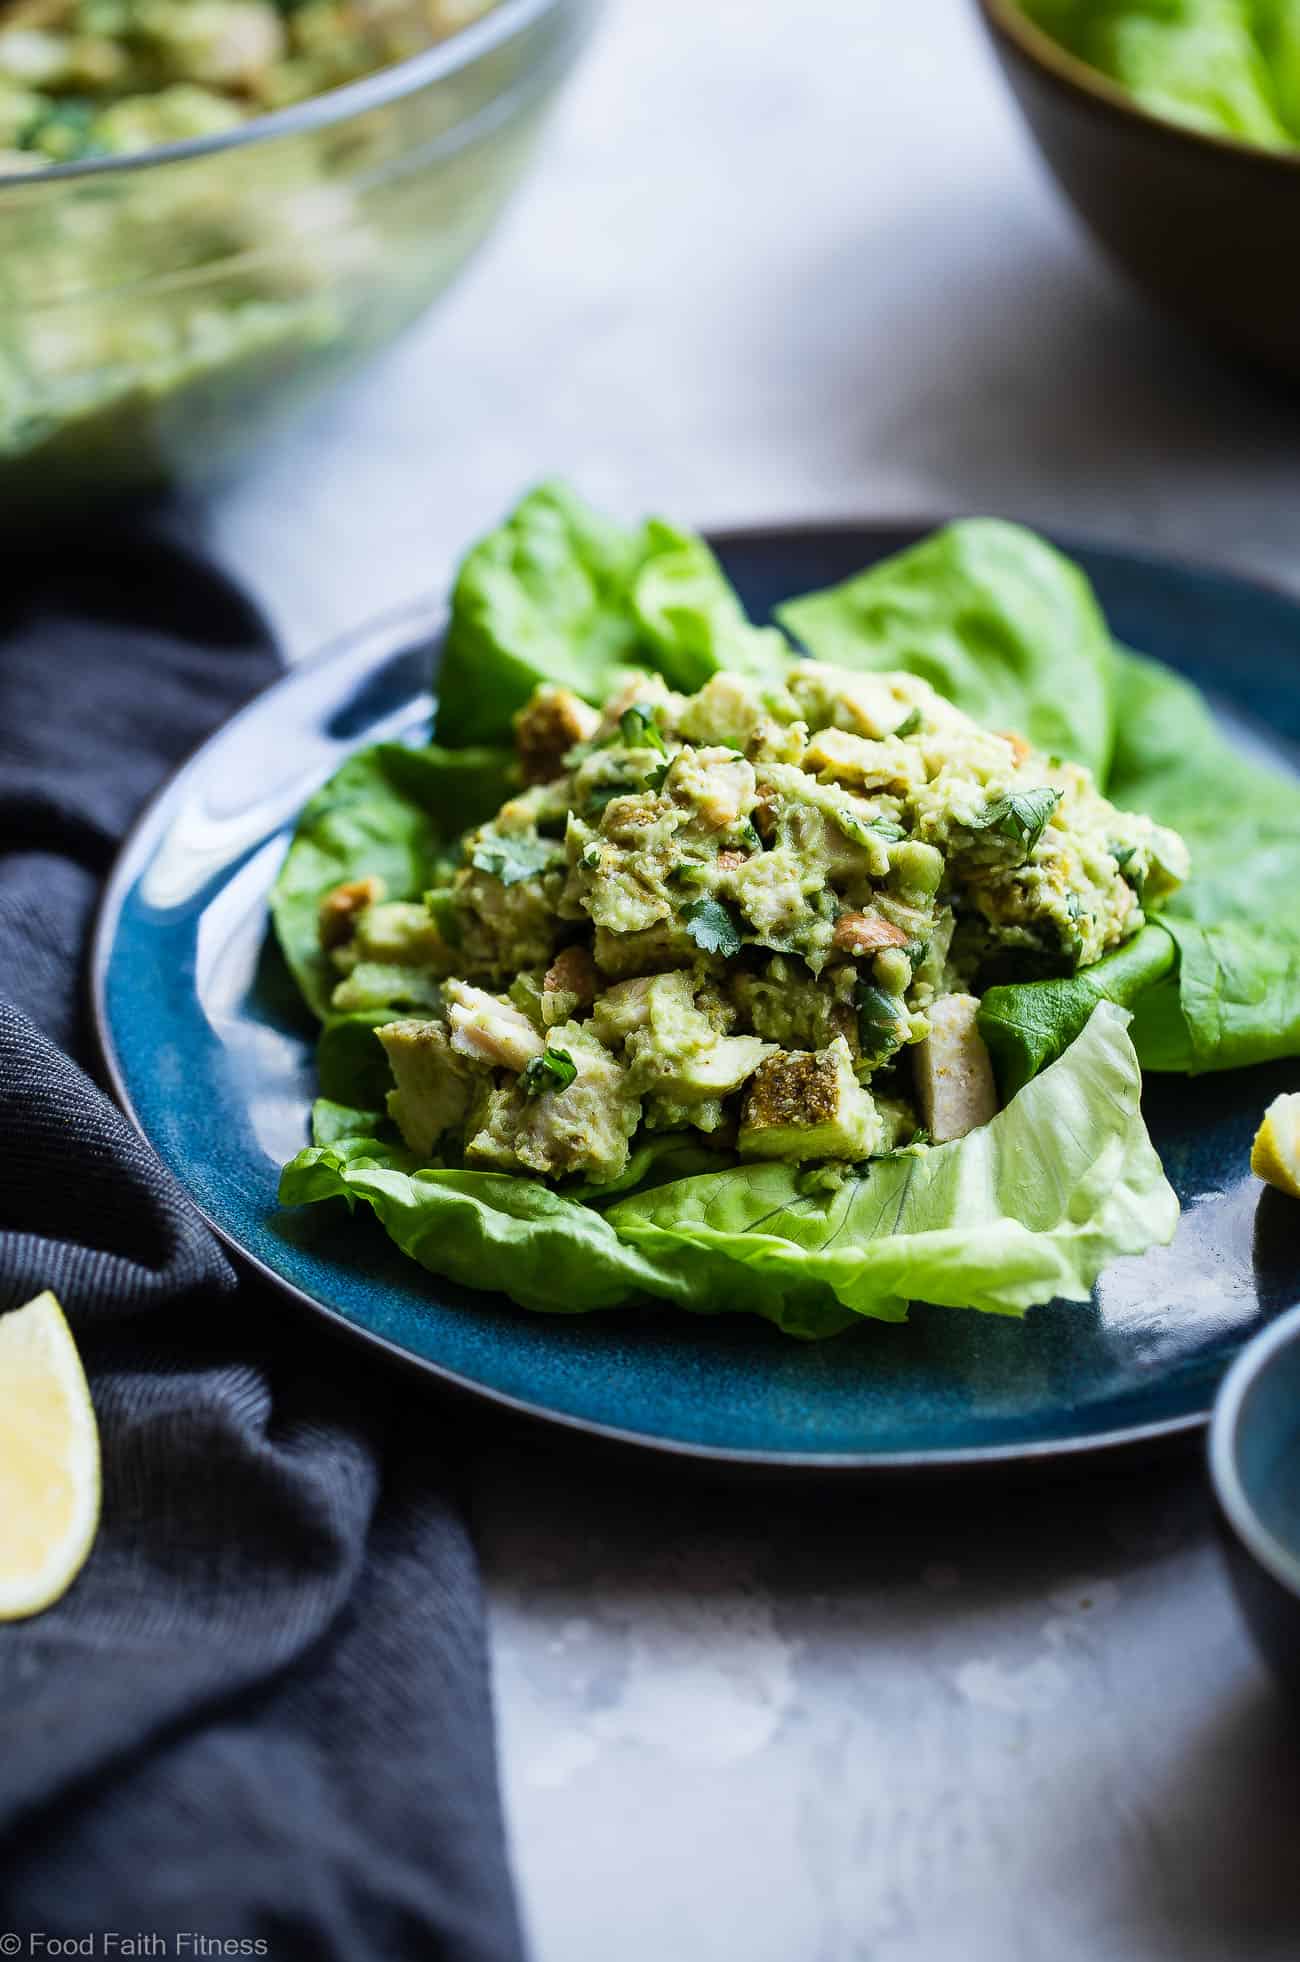 Curried Paleo Chicken Salad Without Mayo - This quick and easy dairy free paleo whole 30 chicken salad is a low carb, keto friendly,  gluten free and whole30 compliant lunch, that is under 350 calorie, with a spicy curry kick! So creamy and delicious and great for meal prep! | Foodfaithfitness.com | @FoodFaithFit